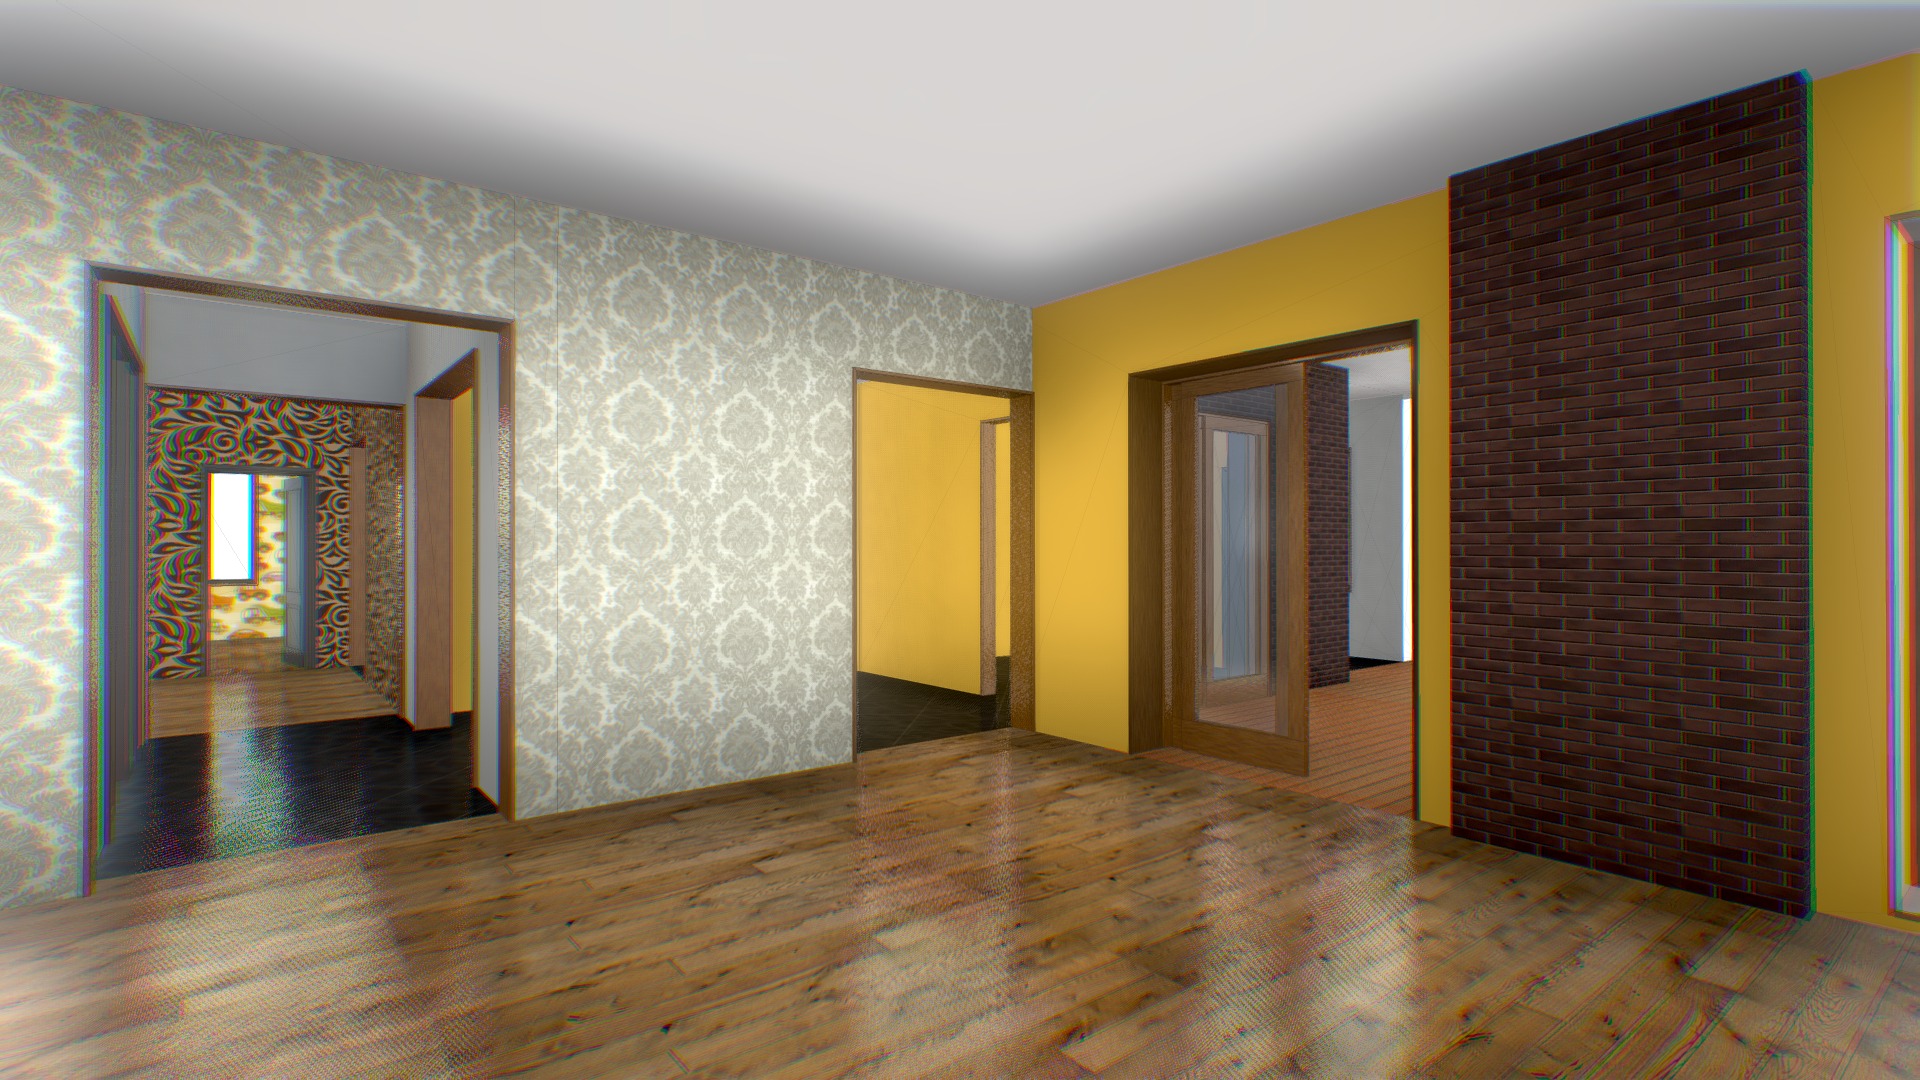 3D model apartment floor plan VR model without furniture - This is a 3D model of the apartment floor plan VR model without furniture. The 3D model is about a hallway with doors.